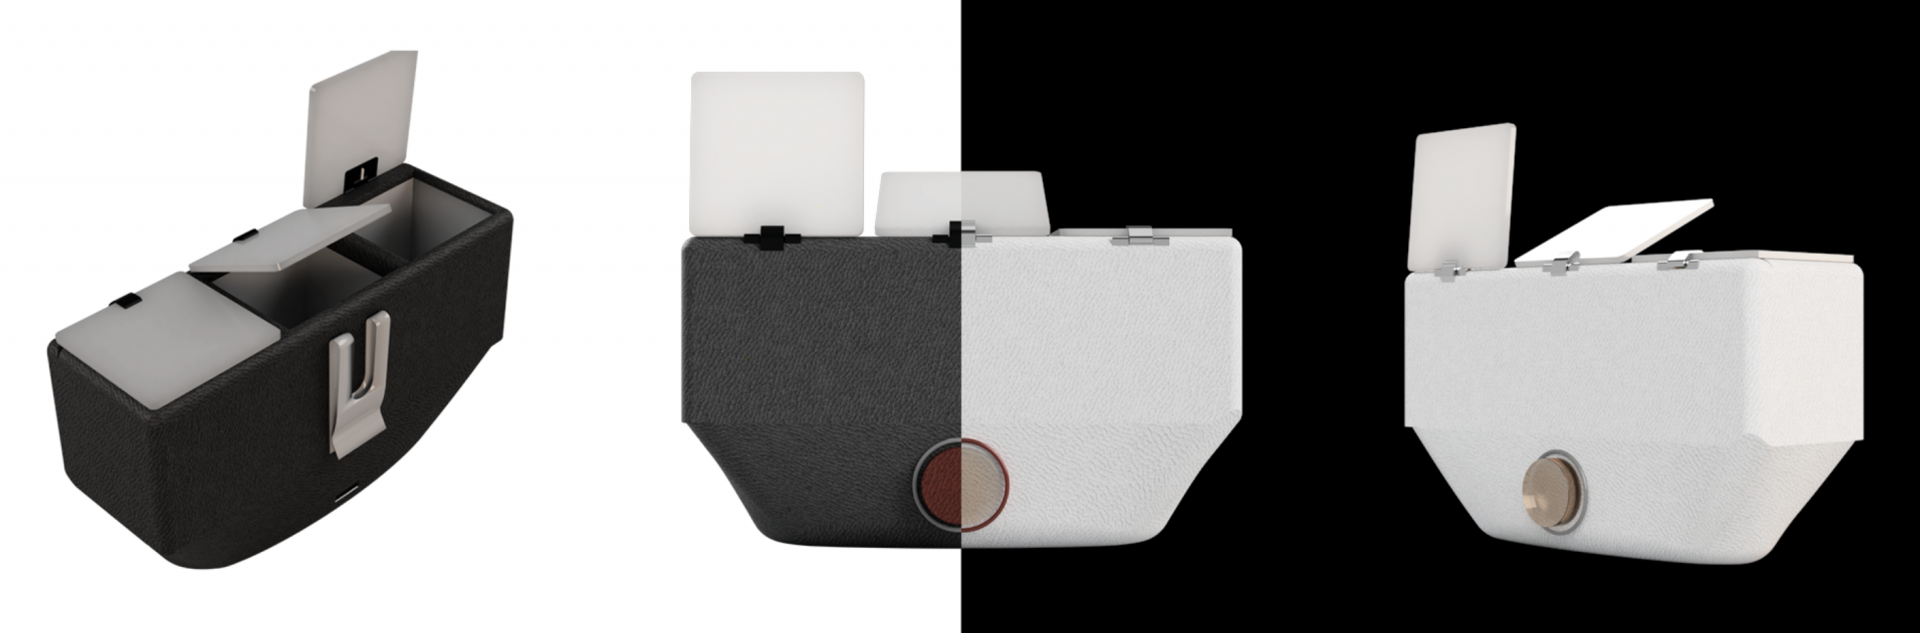 Renders of a medicine case in white and black. 